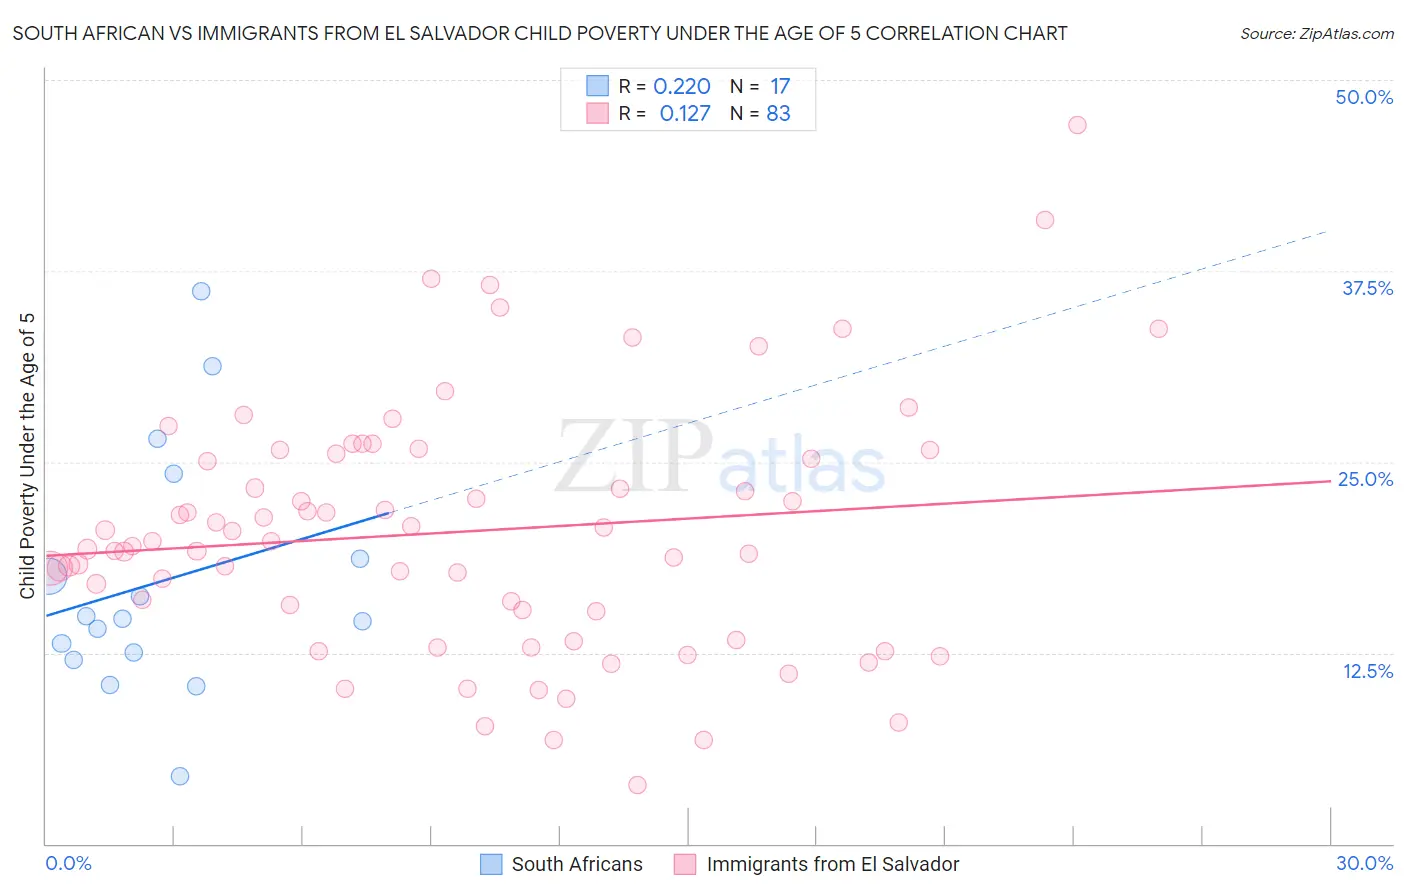 South African vs Immigrants from El Salvador Child Poverty Under the Age of 5